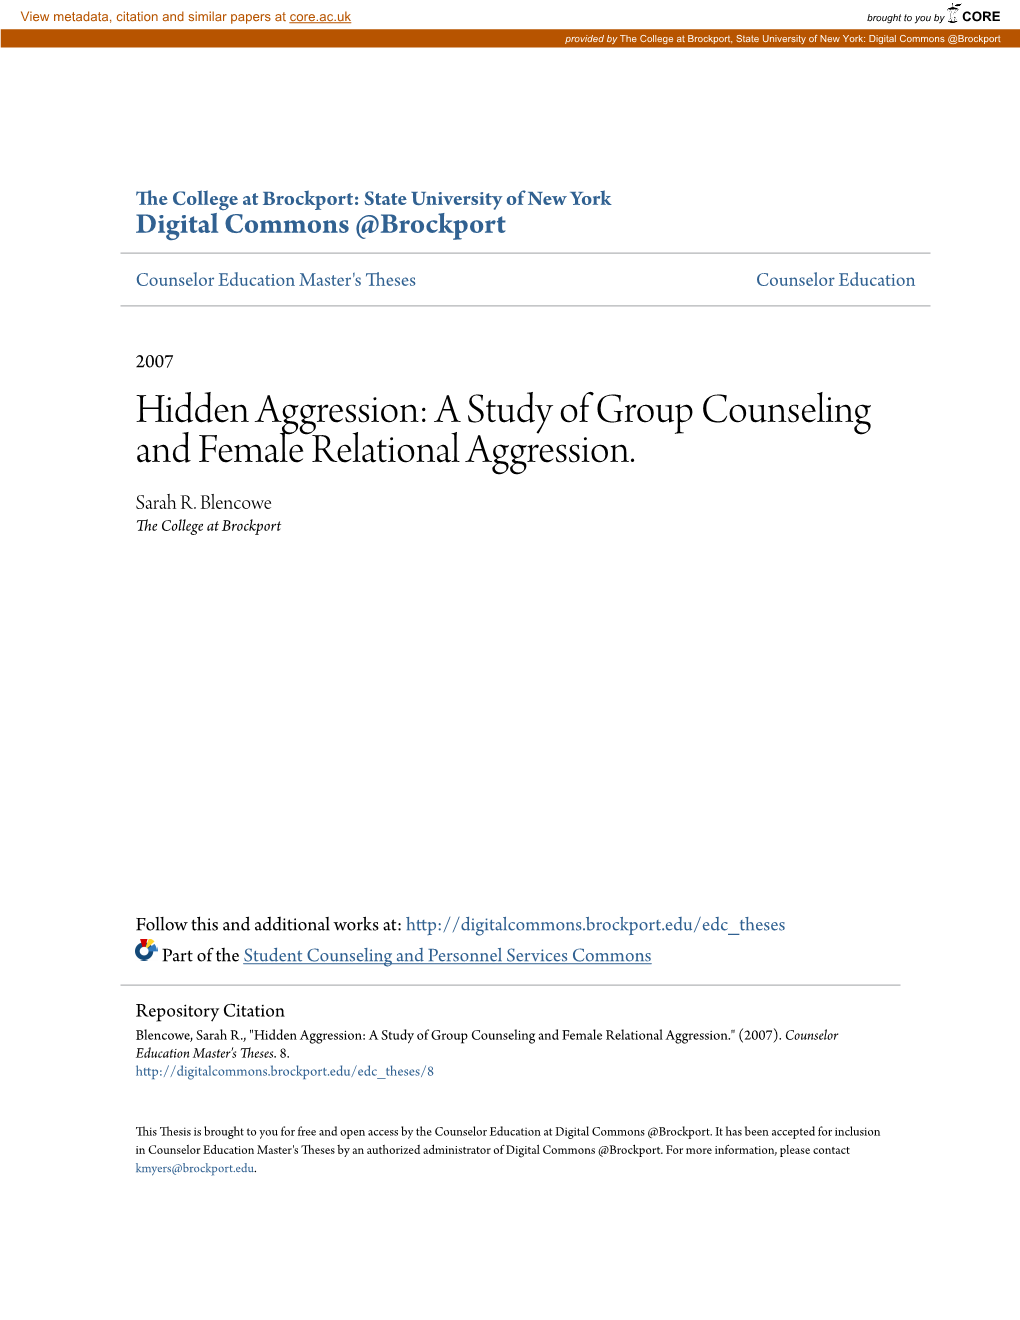 A Study of Group Counseling and Female Relational Aggression. Sarah R